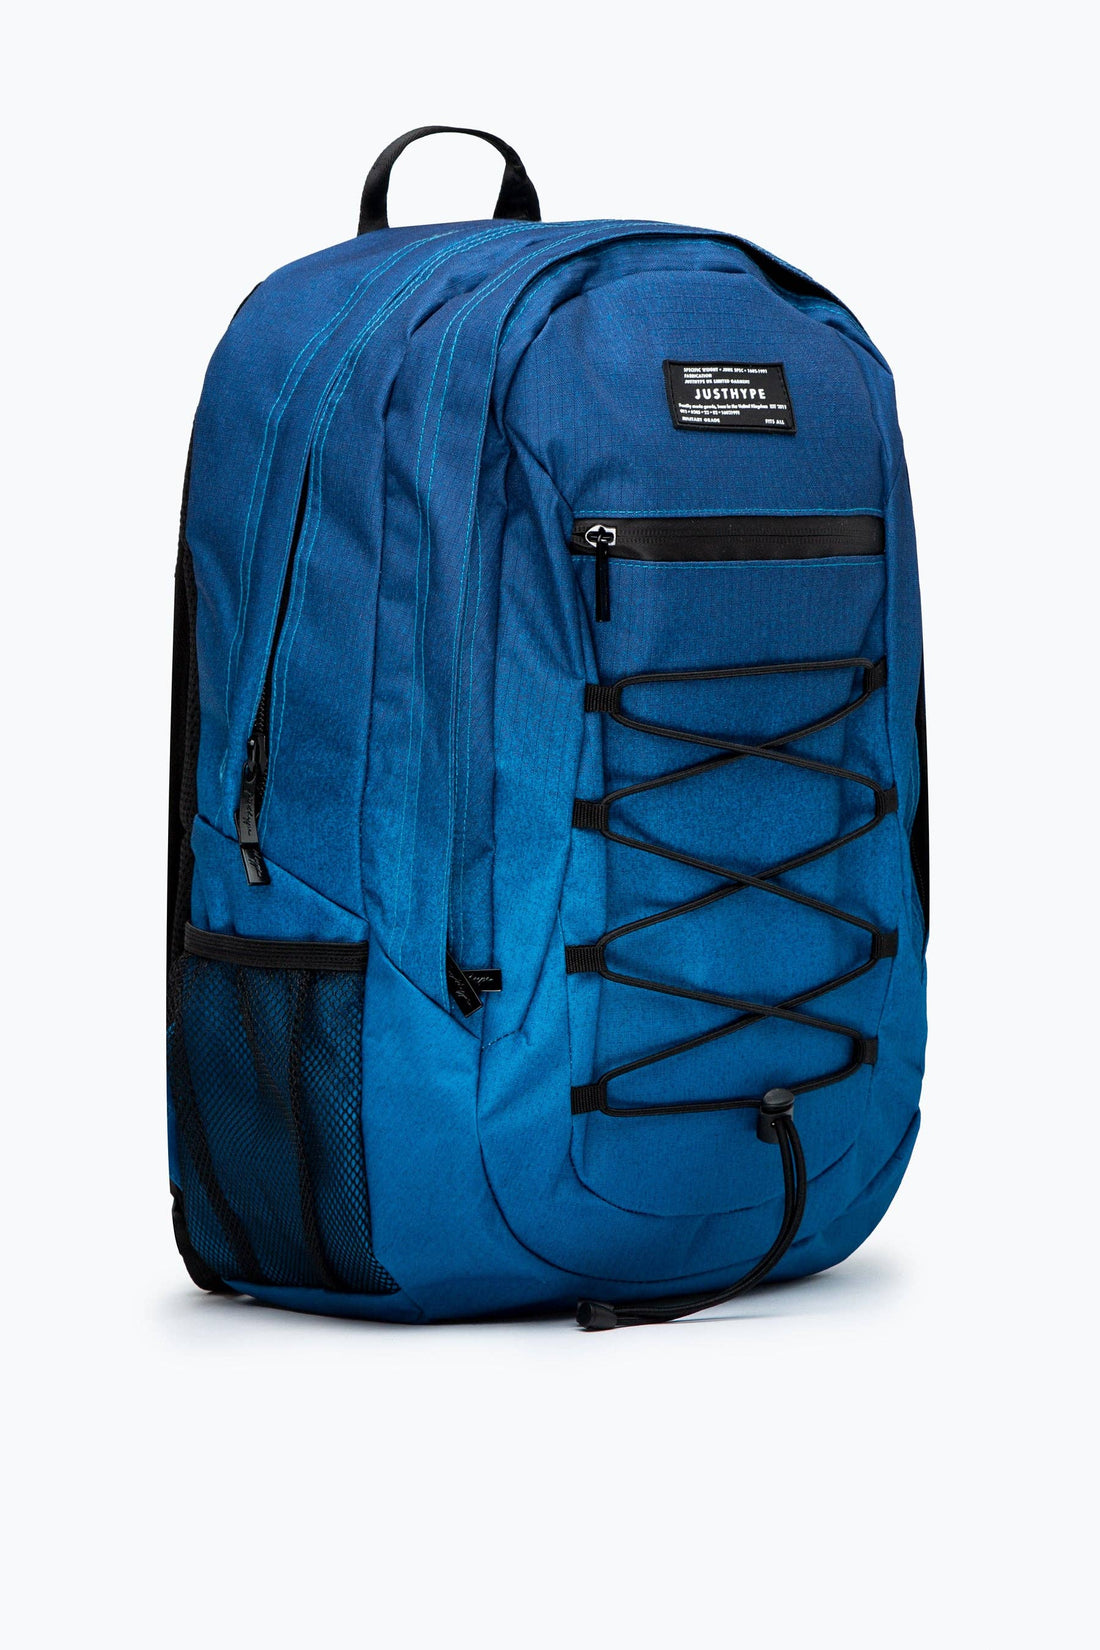 Blue Speckle Fade Military Patch Maxi Backpack